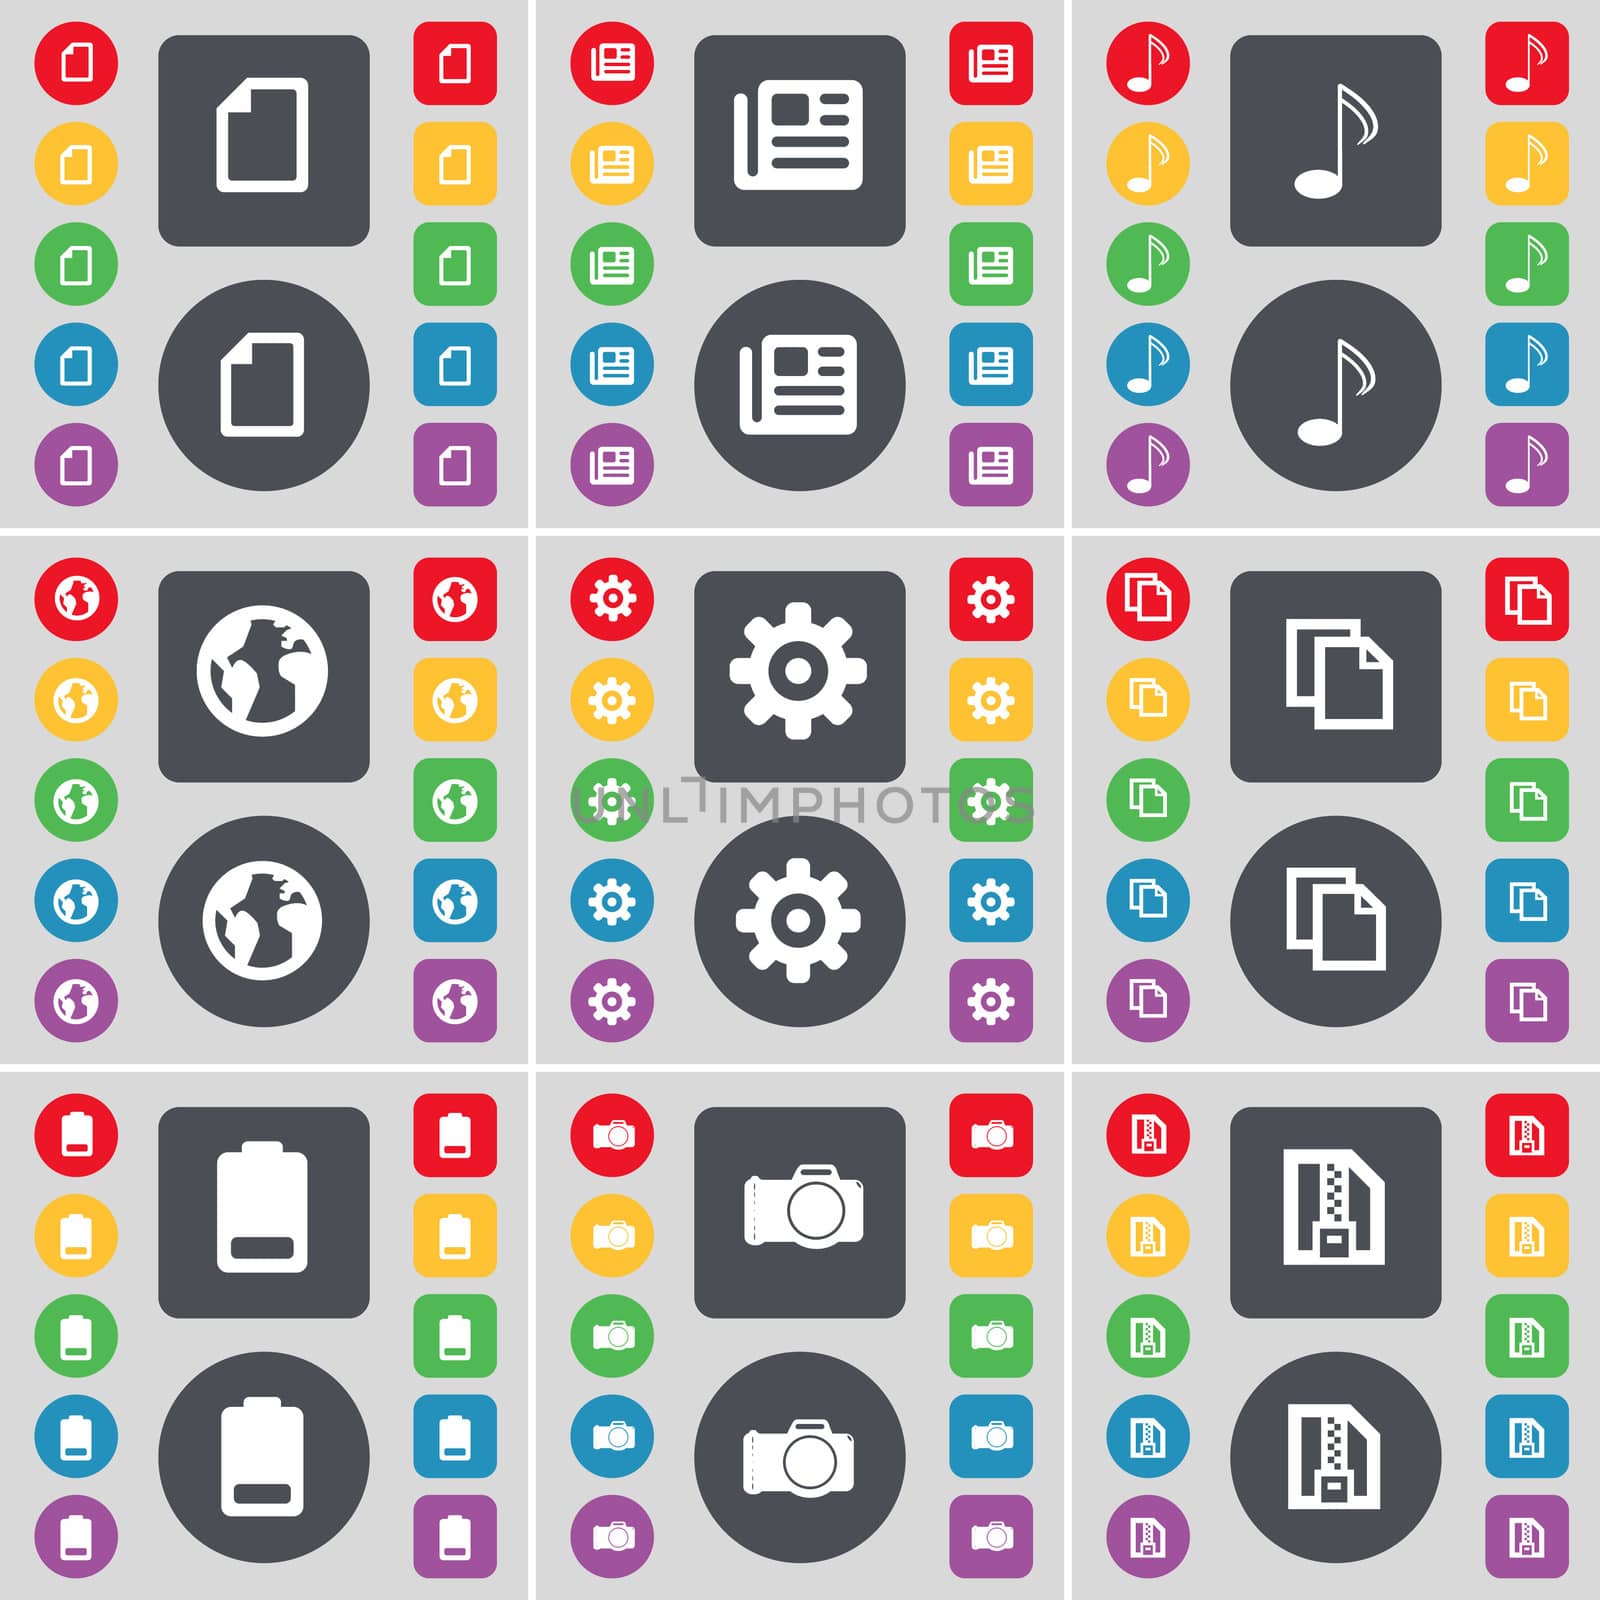 File, Newspaper, Note, Earth, Gear, Copy, Battery, Camera, ZIP card icon symbol. A large set of flat, colored buttons for your design. illustration